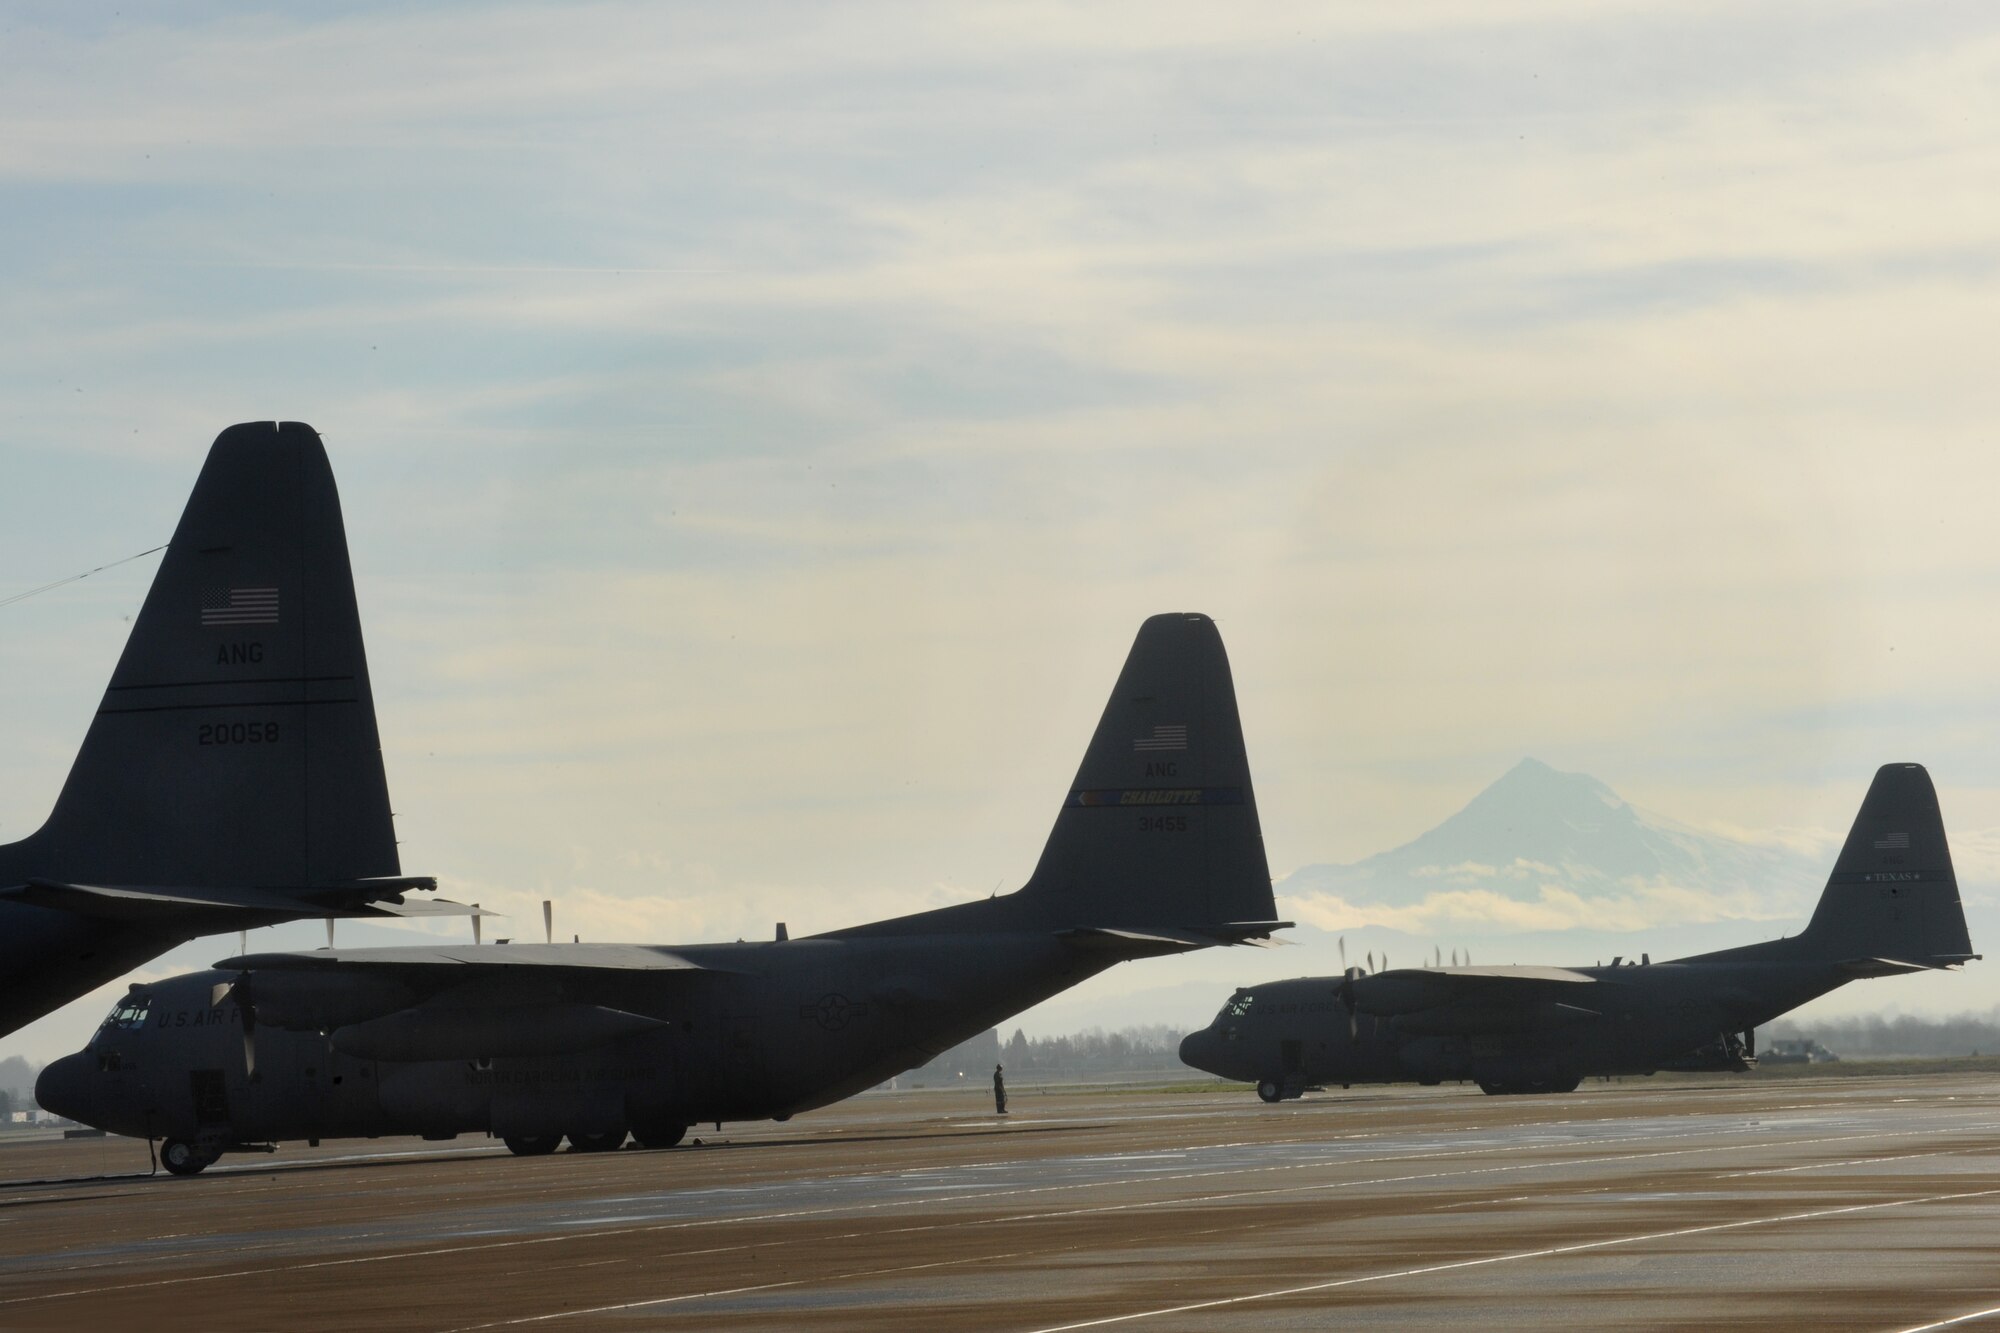 Several C-130 Hercules aircraft wait for cargo loads at the Portland Air National Guard Base, Ore., prior to departing for Nellis Air Force Base, Nev., Feb. 28, 2014. (U.S. Air National Guard photo by Tech. Sgt. John Hughel/Released)